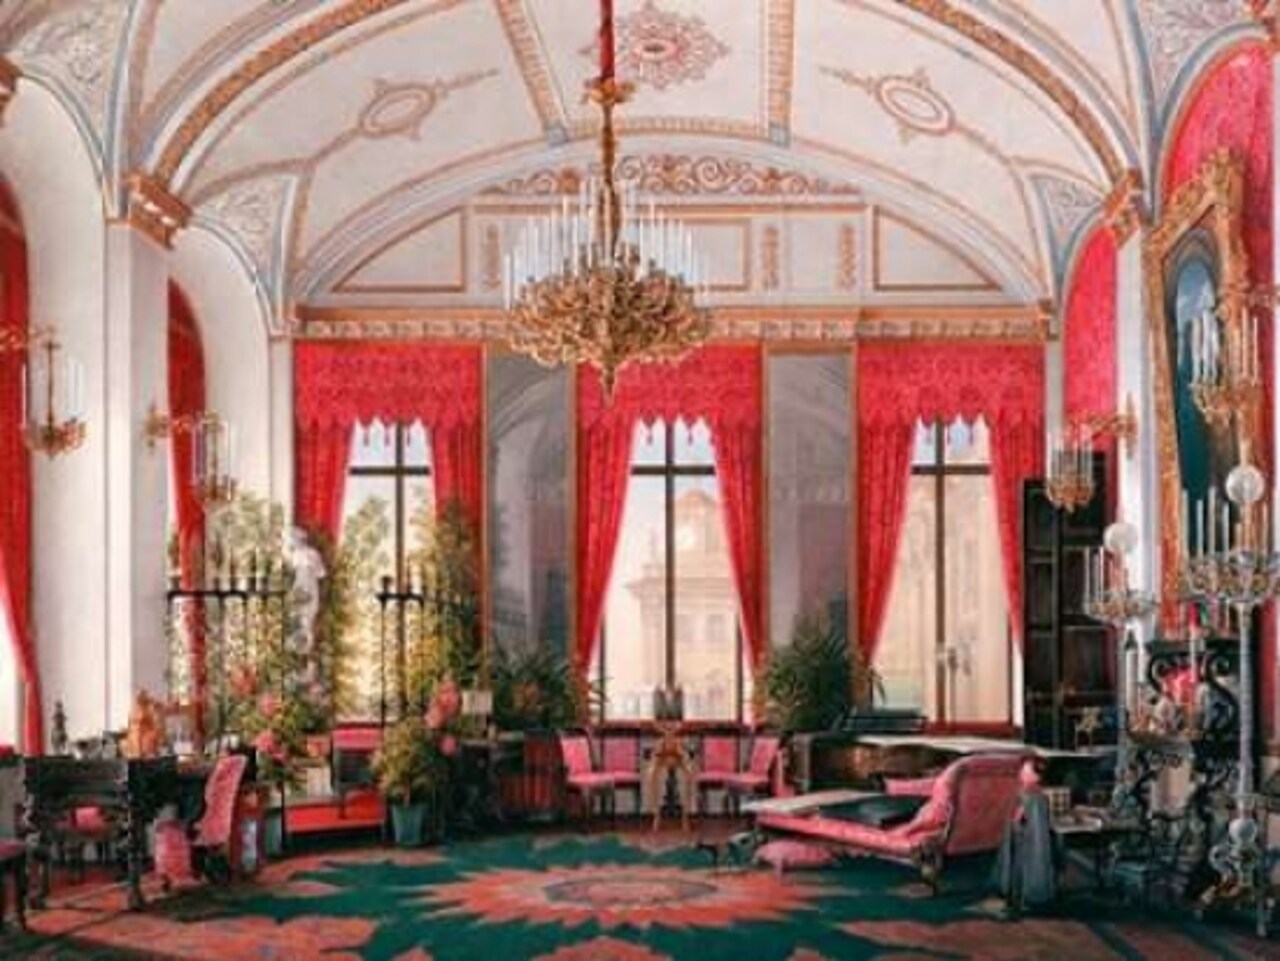 Interiors of the Winter Palace: the Raspberry Study Poster Print by Edward Petrovich Hau - Item # VARPDX3AA3812